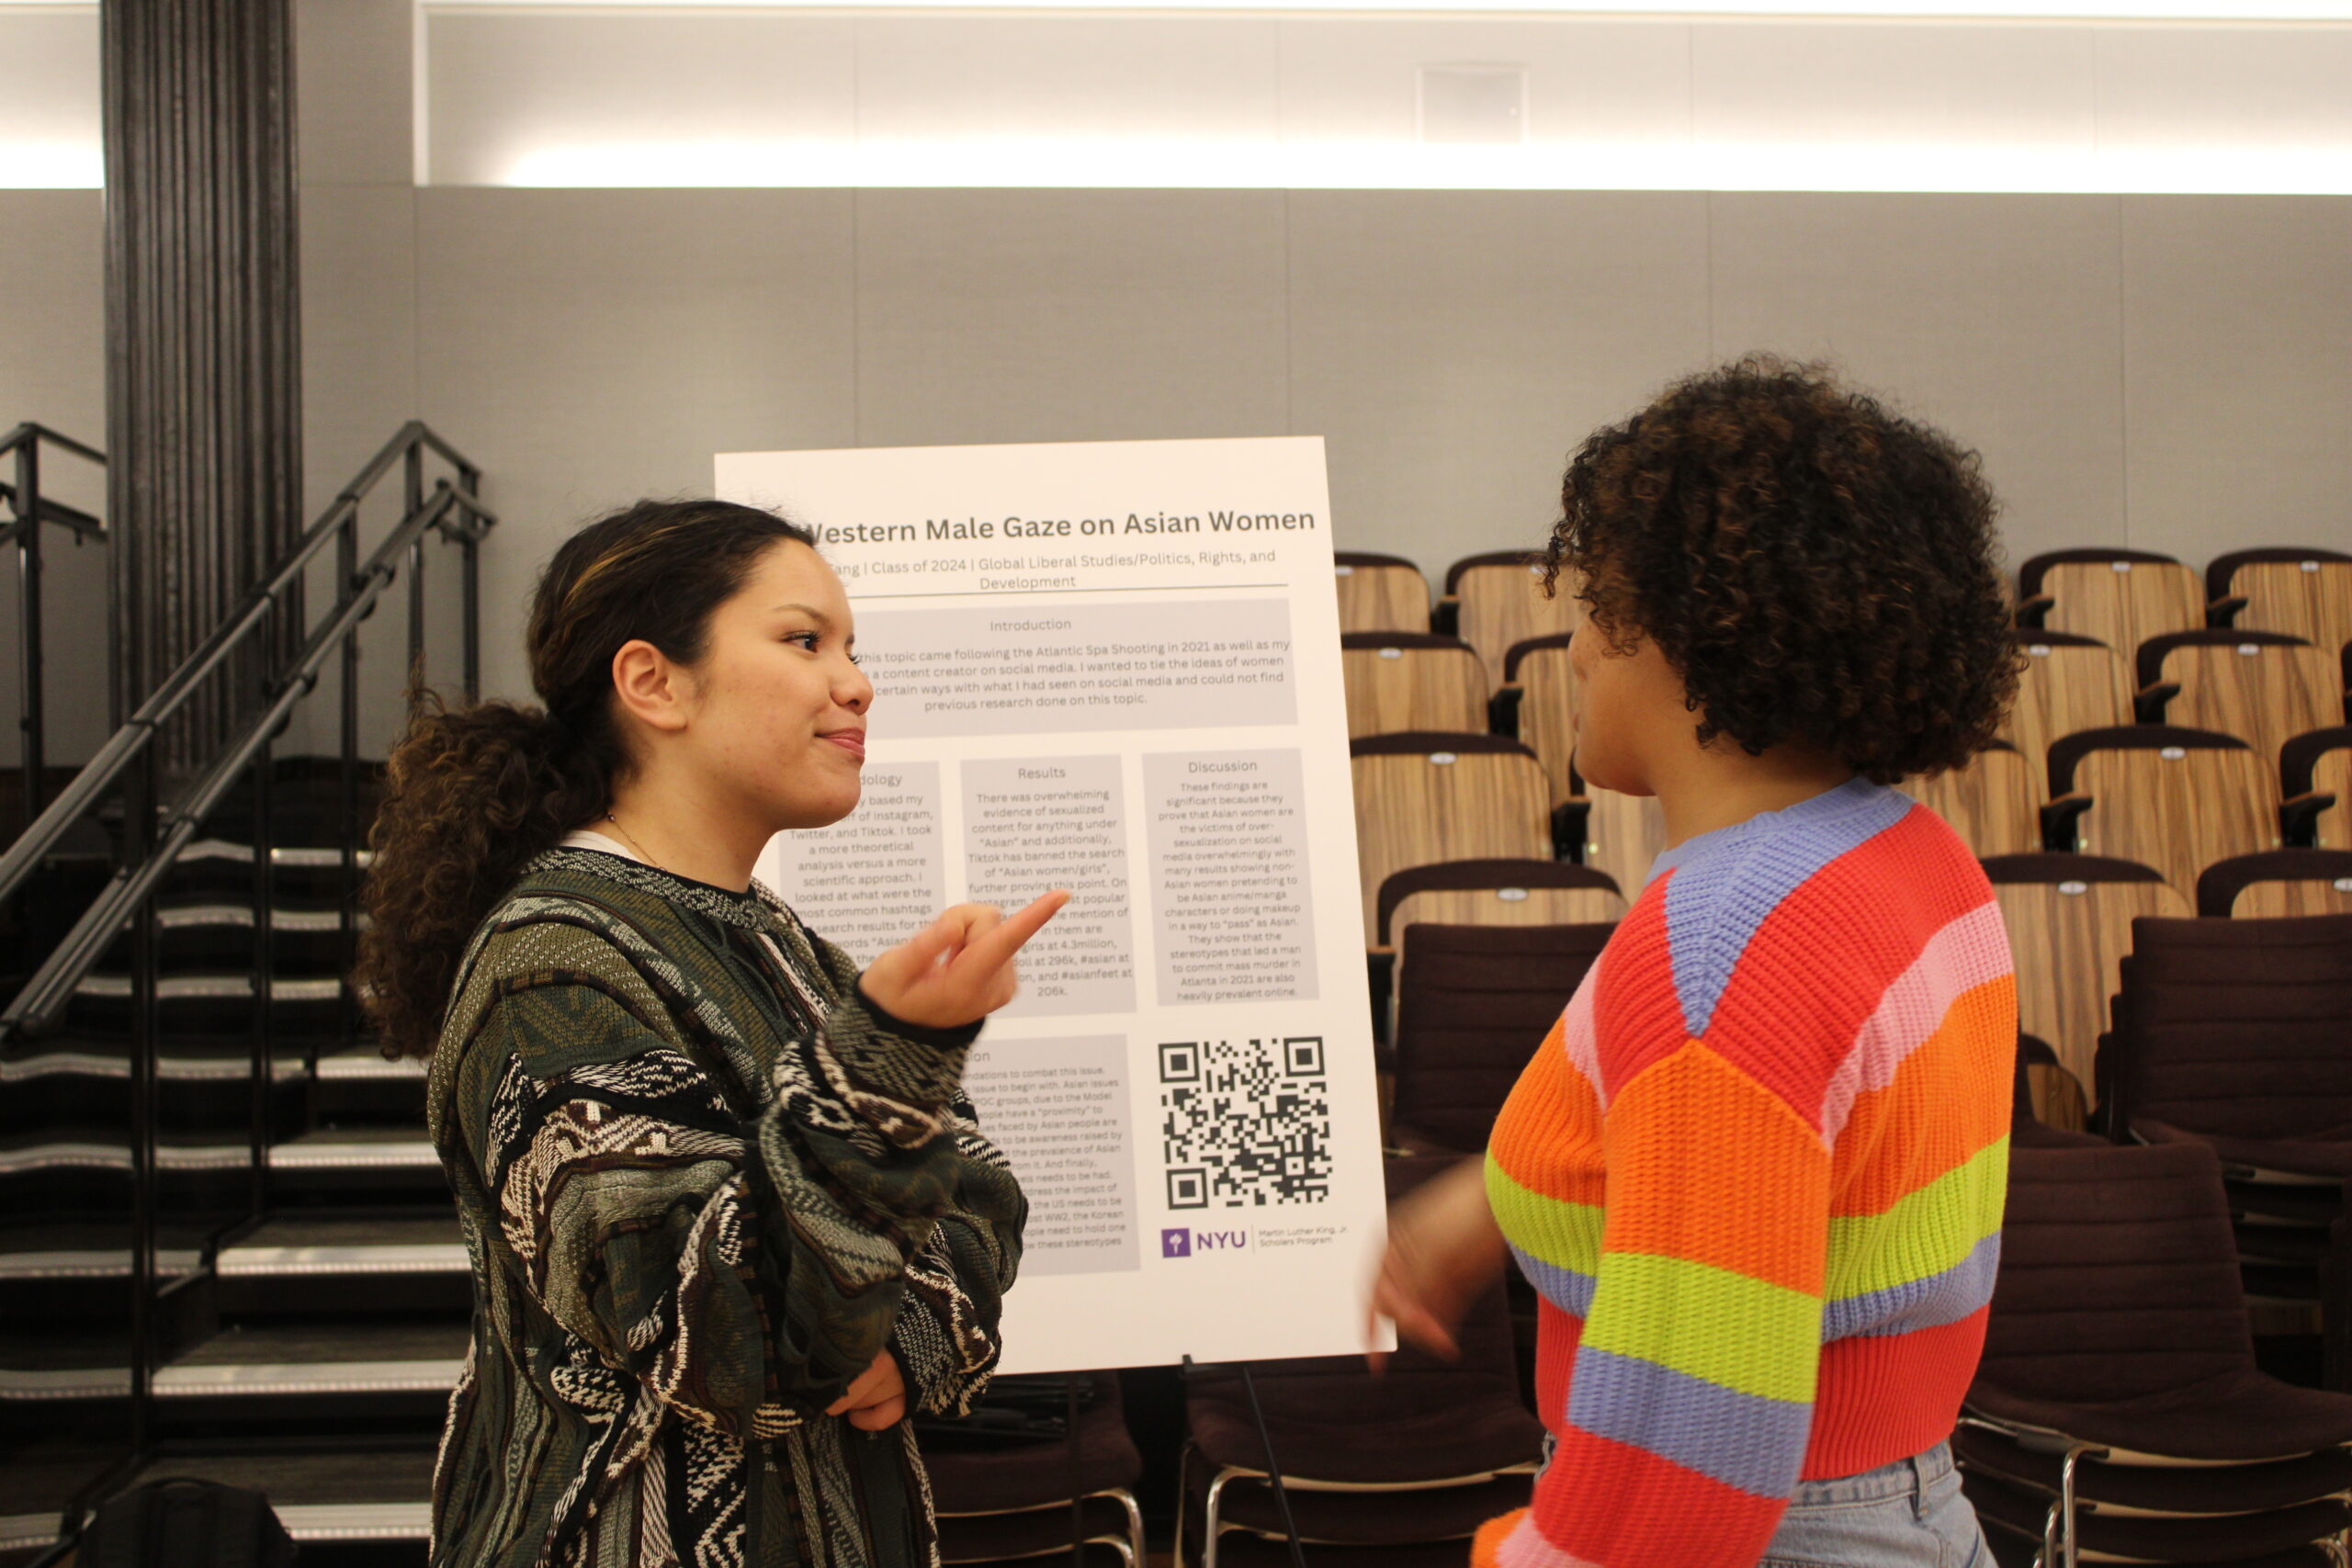 Two scholars speaking in front of a poster board